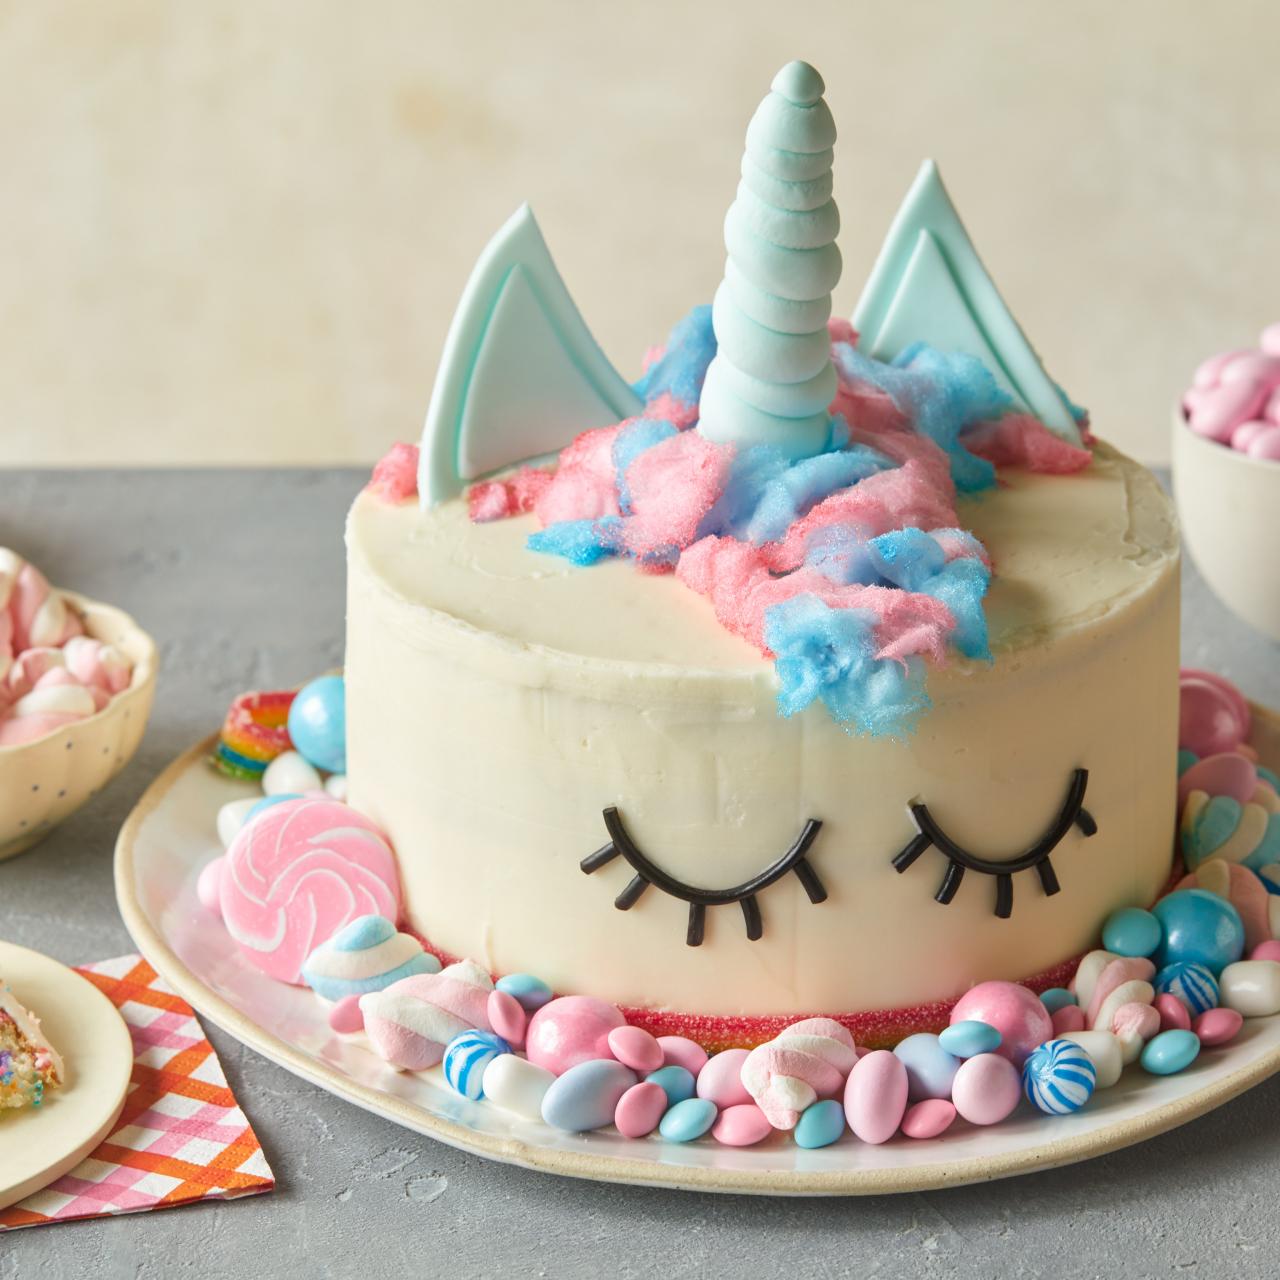 How to decorate unicorn cake with frosting and fondant